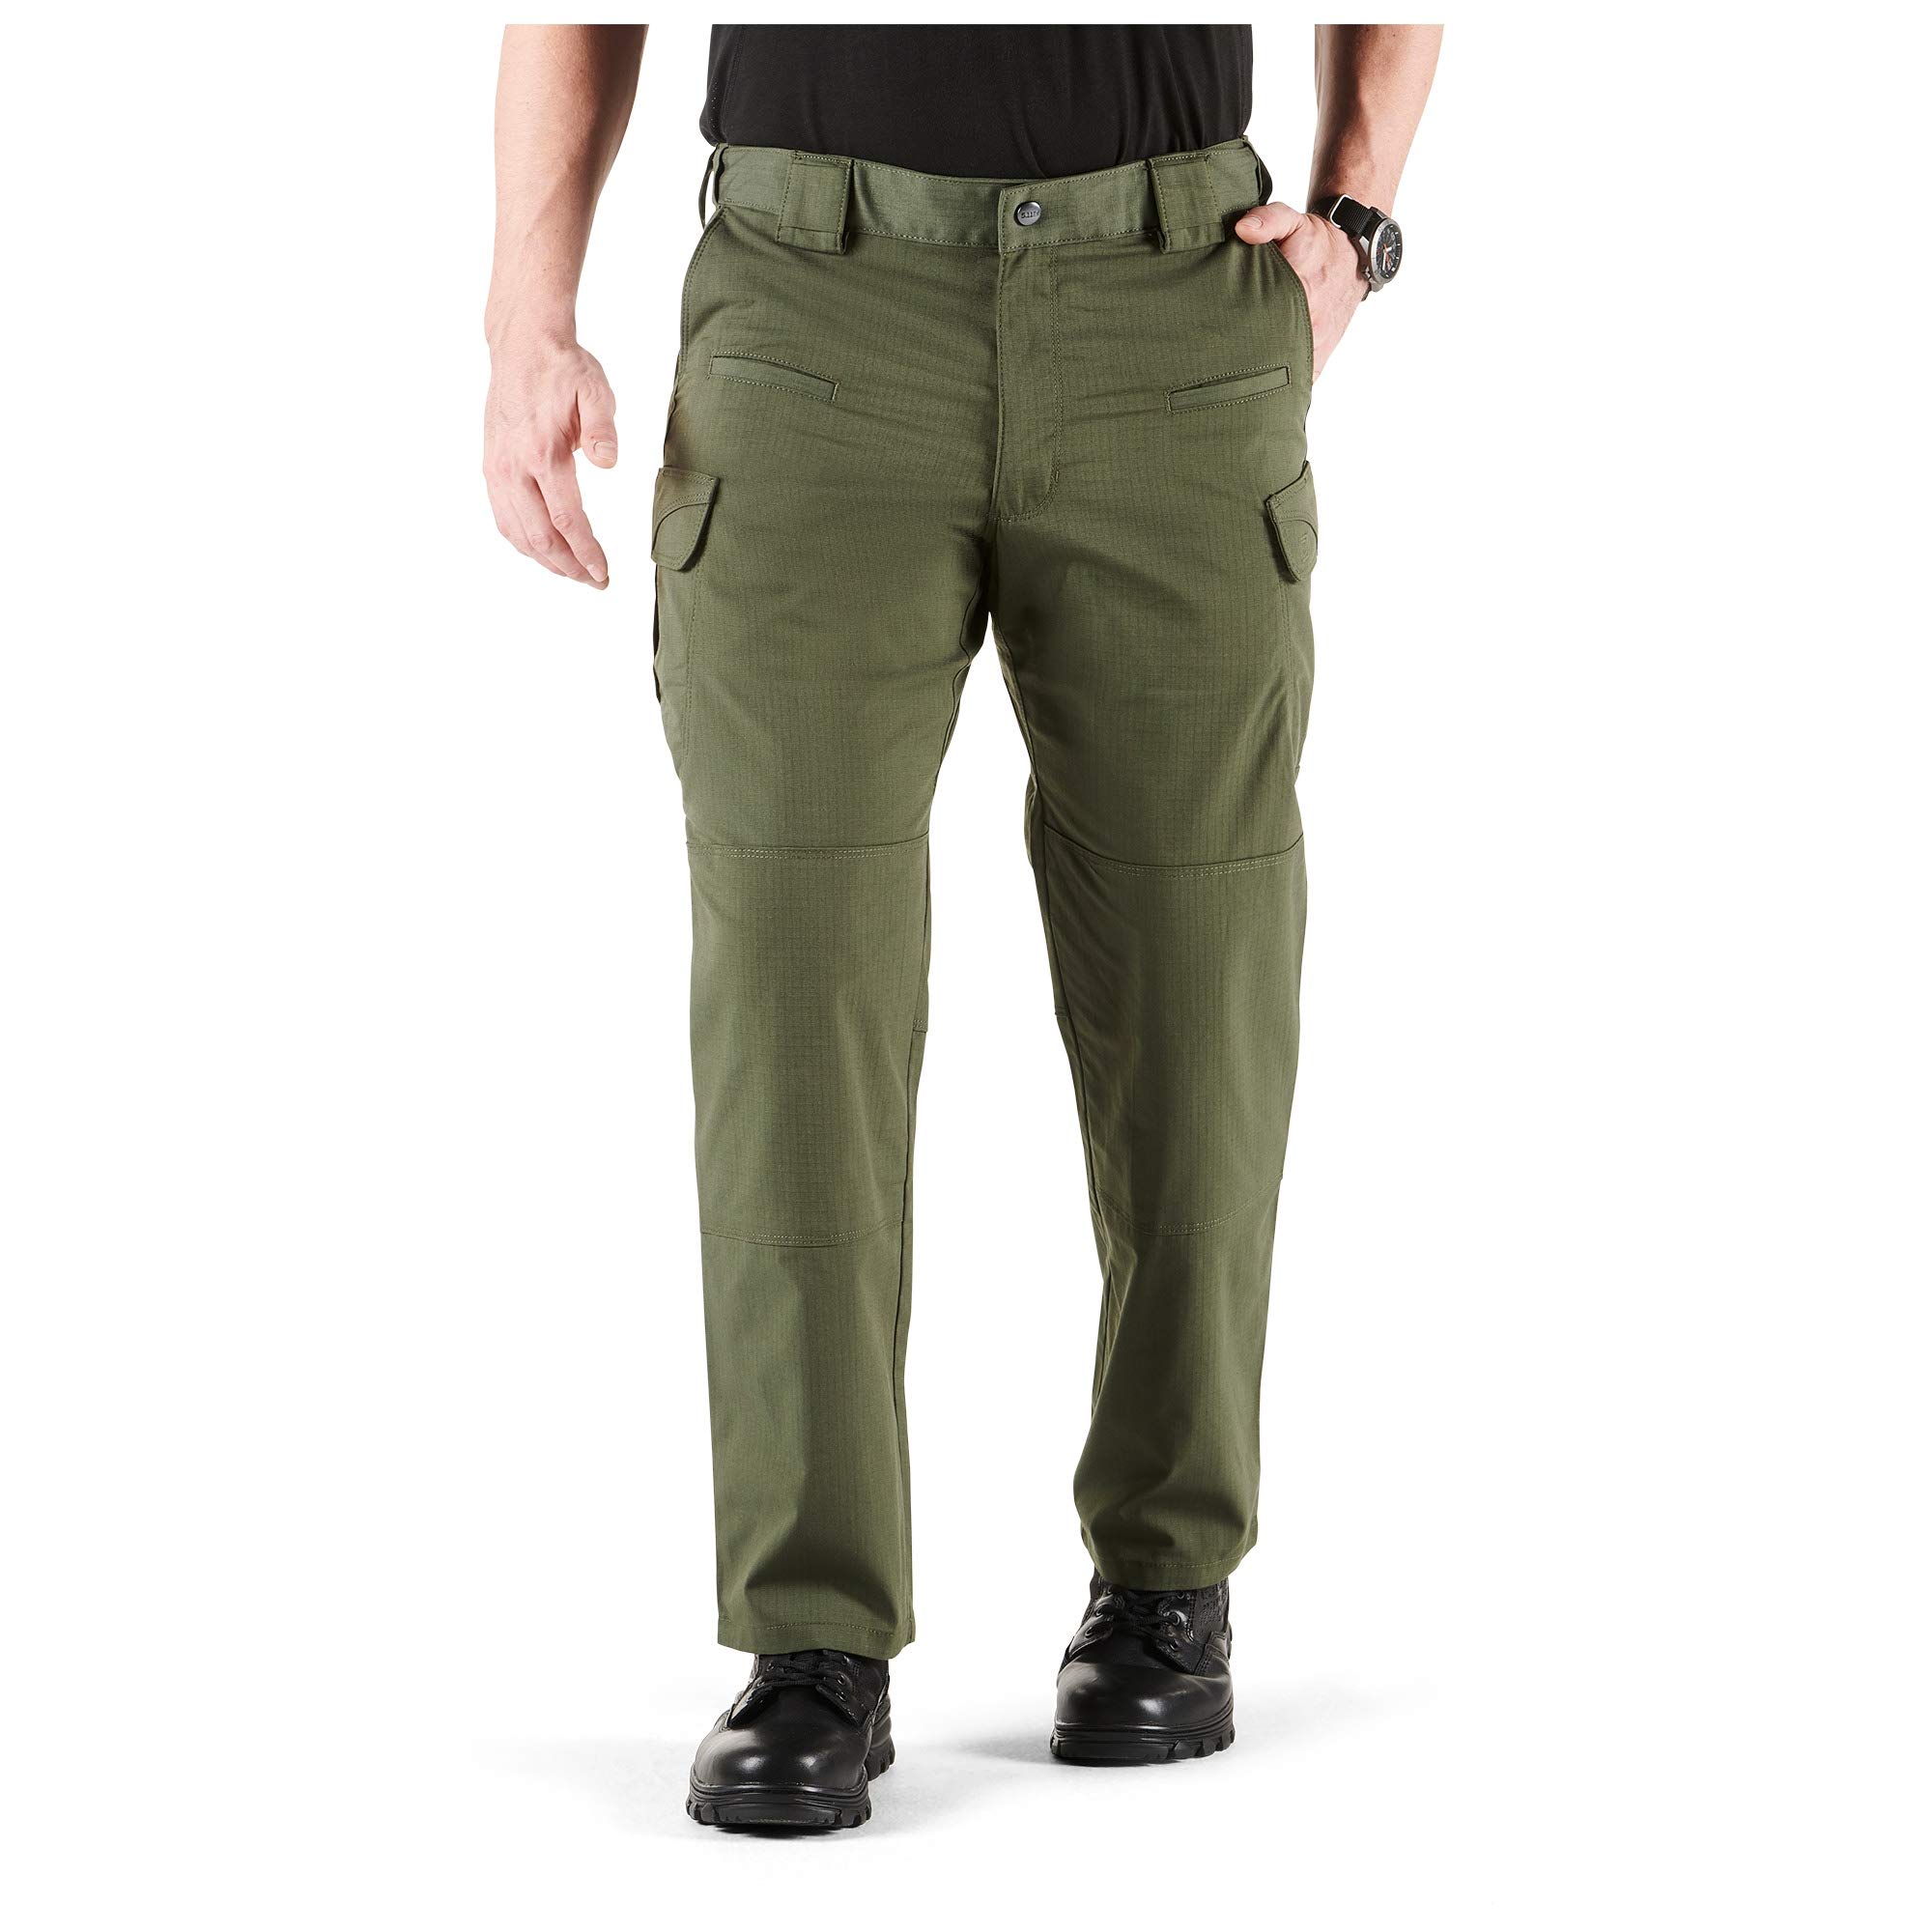 511 Tactical Mens Stryke Military Pants, Adjustable Waistband, Stretchable Flex-Tac Fabric, Tdu Green, 30Wx30L, Style 74369